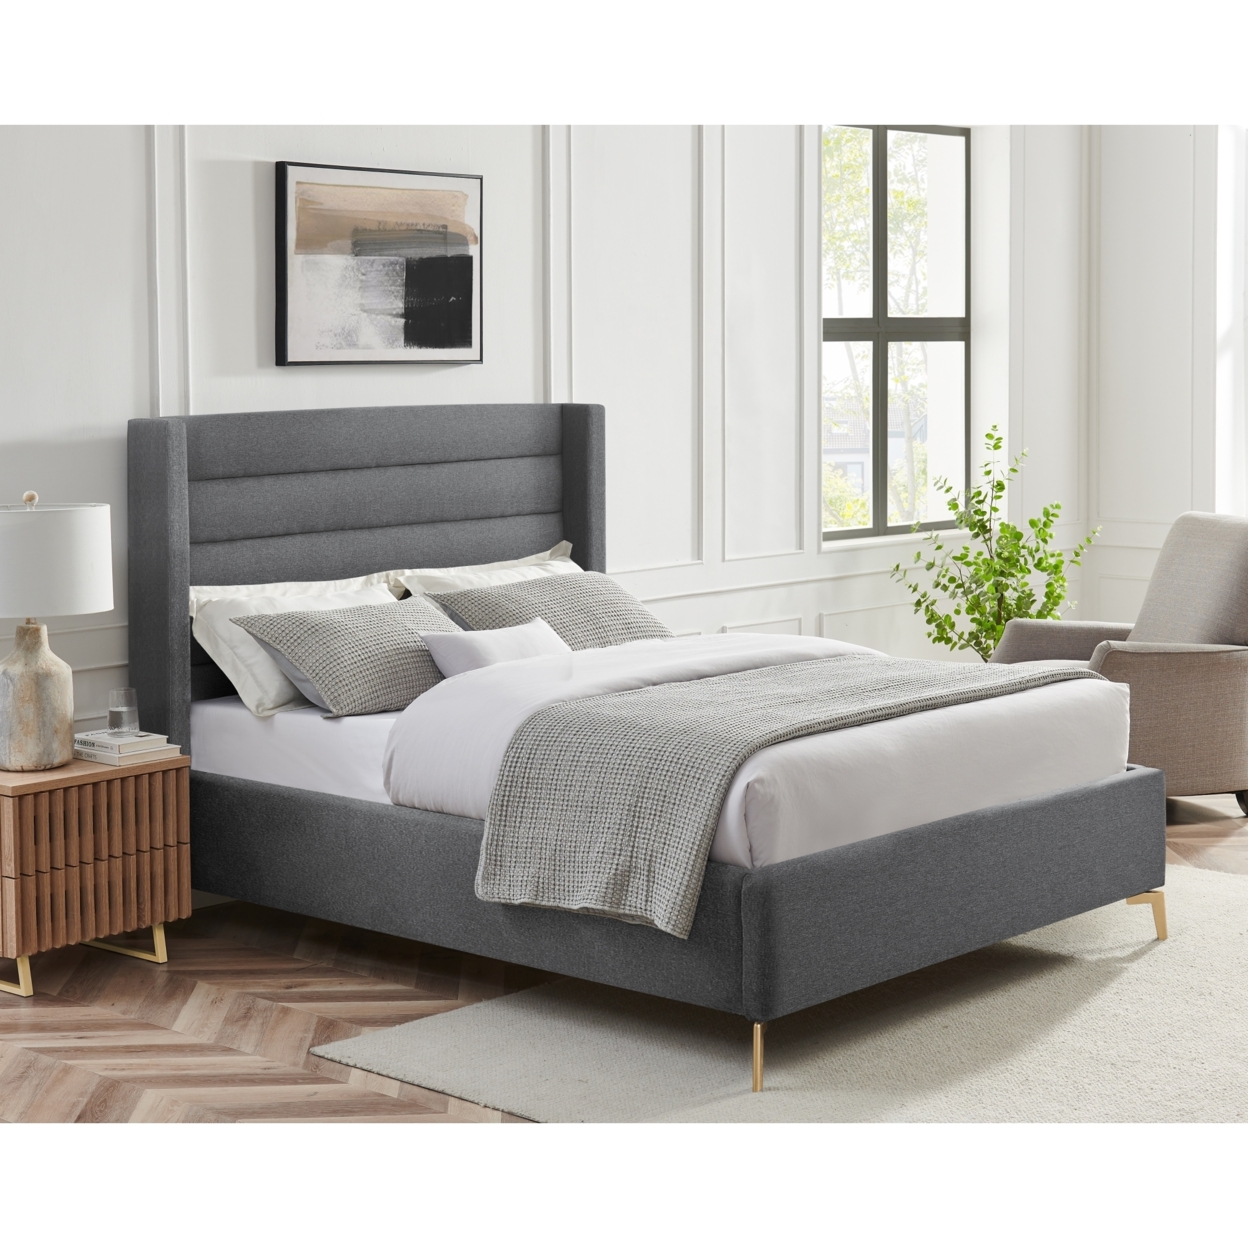 Rayce Bed - Linen Upholstered, Wingback Channel Tufted Headboard, Oblique Legs, Slats Included - Grey, Full